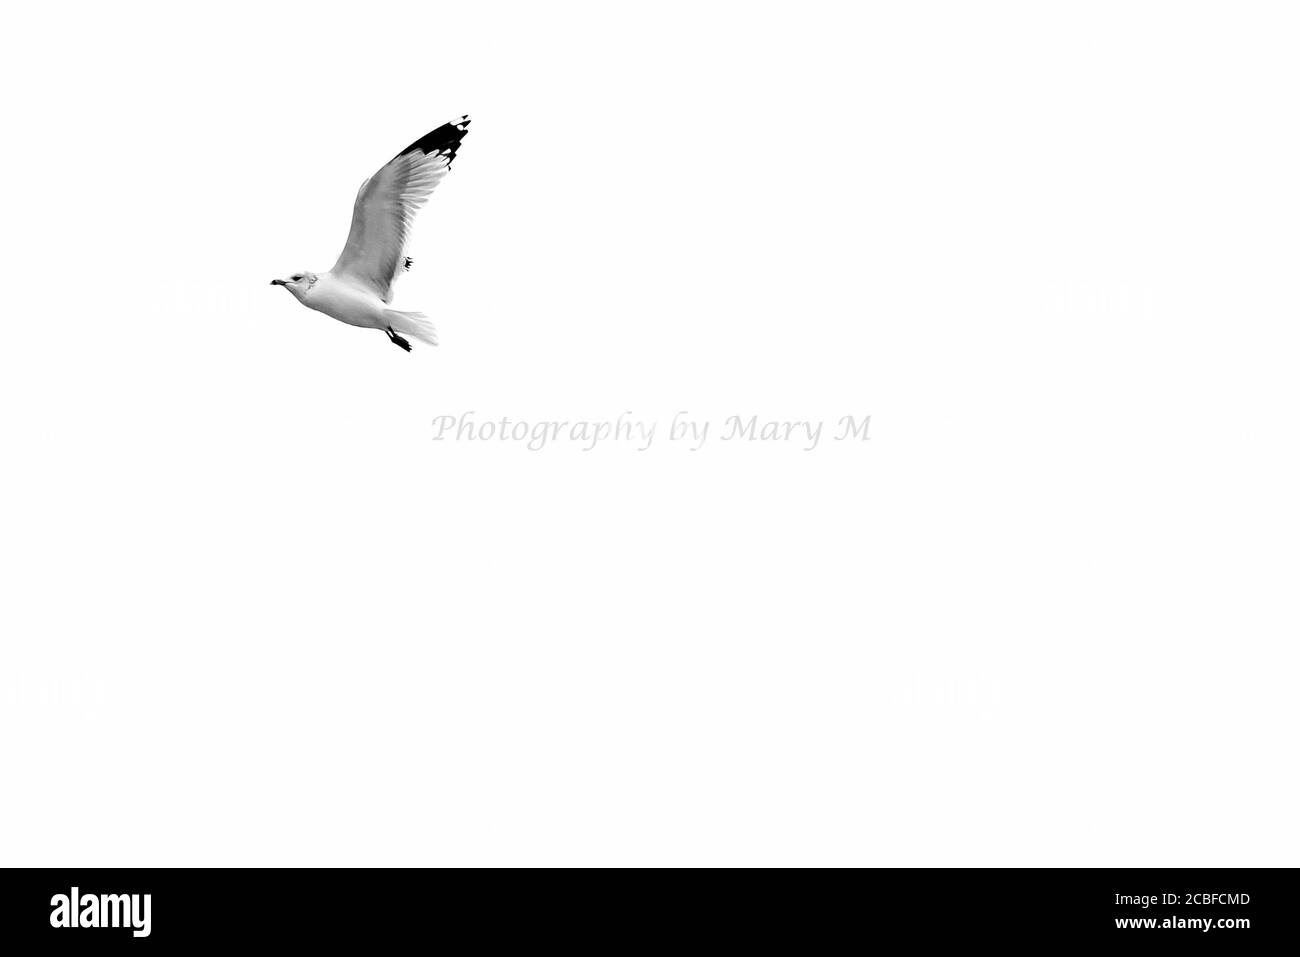 A seagull in flight on a white background Stock Photo